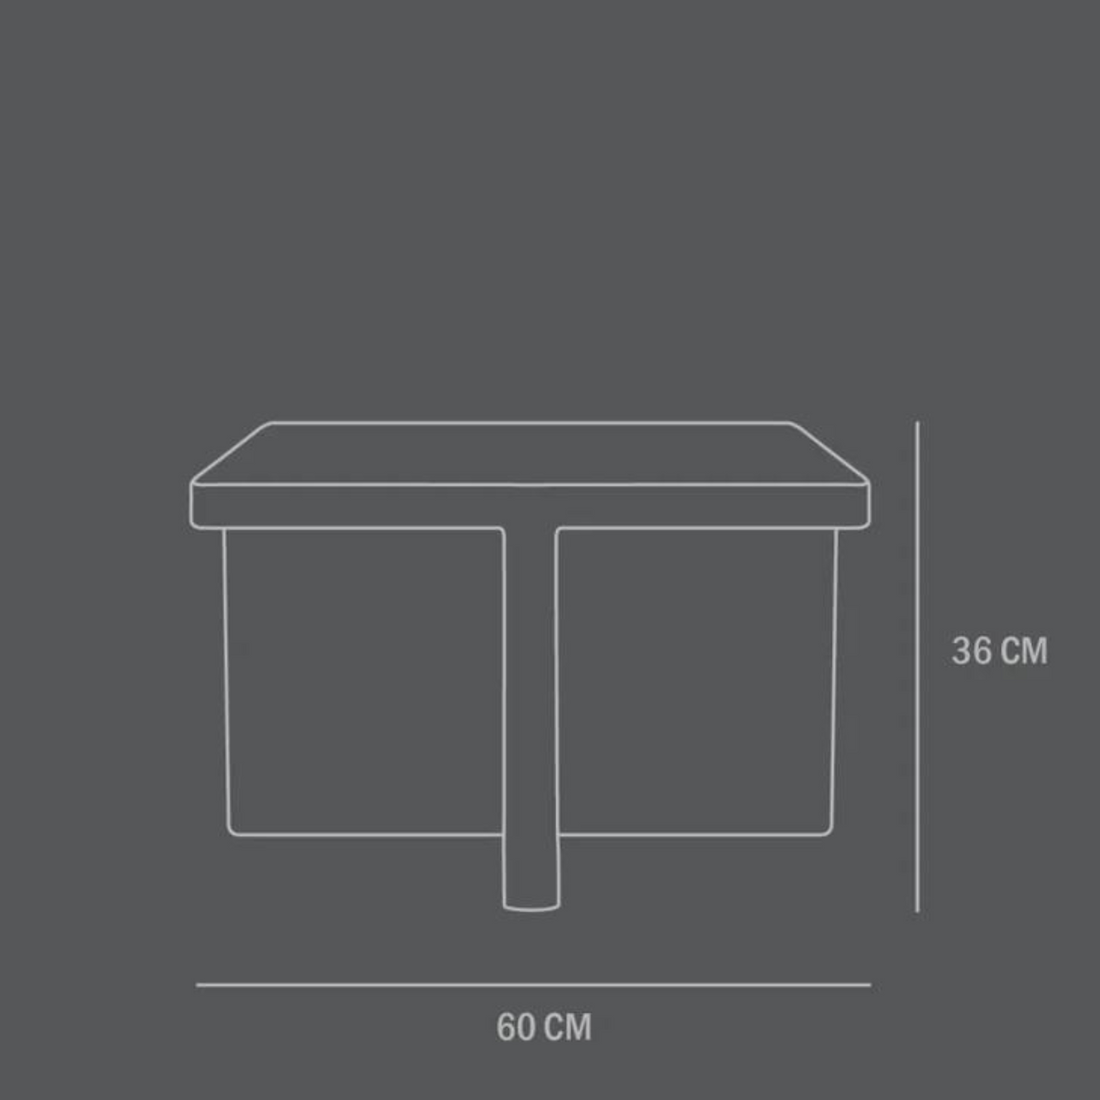 101 Brutus Coffee Table Dimensions